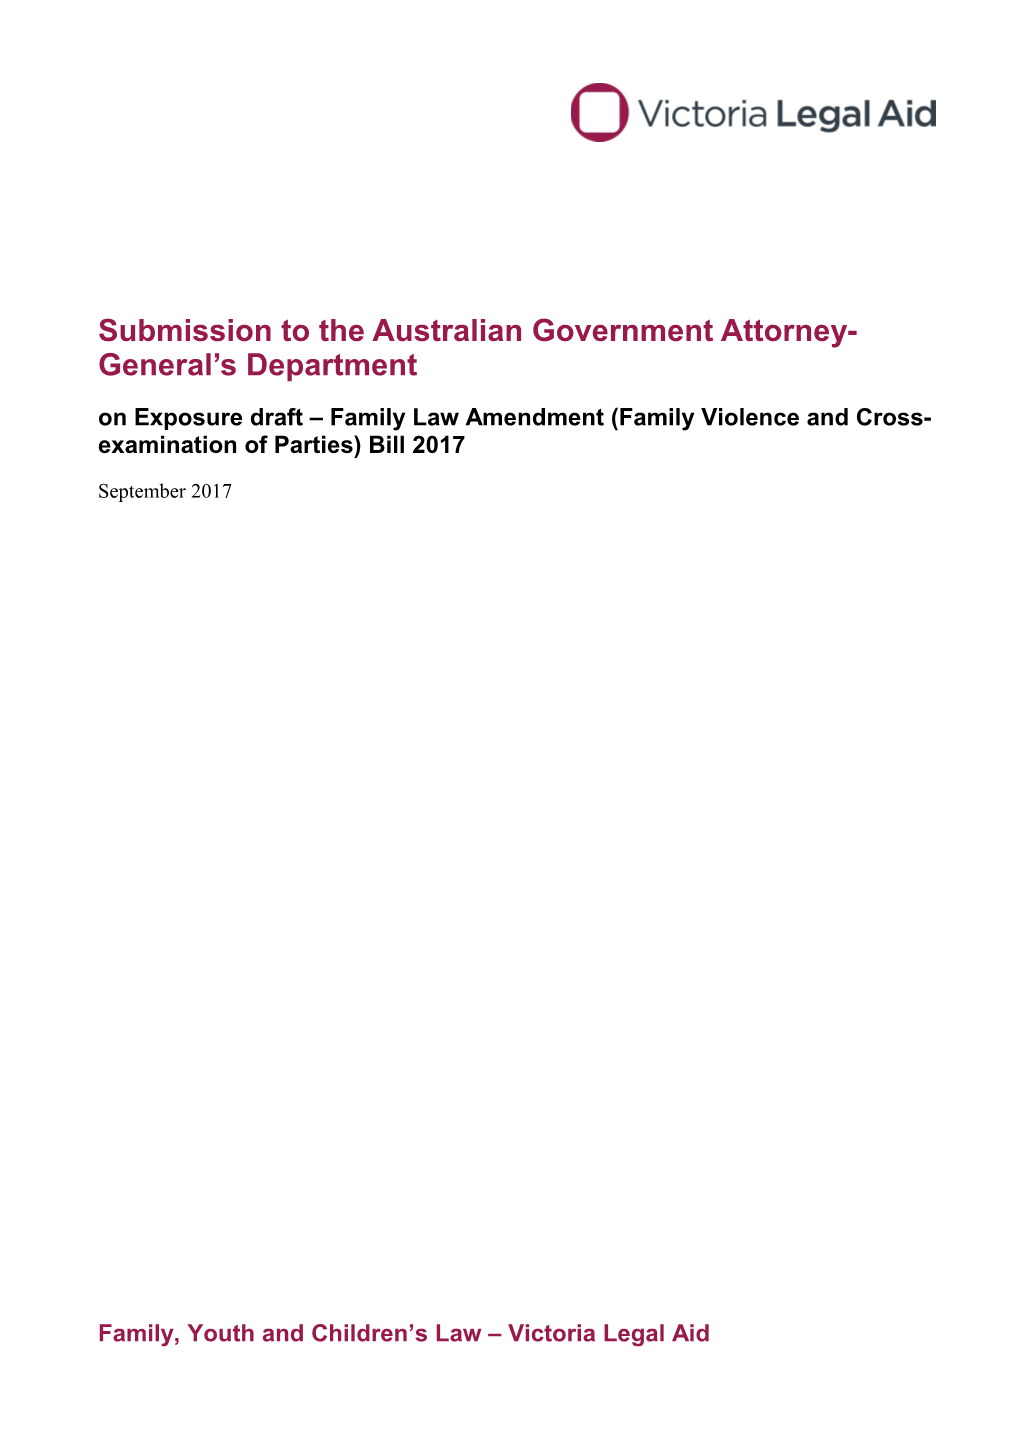 Submission on Exposure Draft Family Law Amendment (Family Violence and Cross-Examination